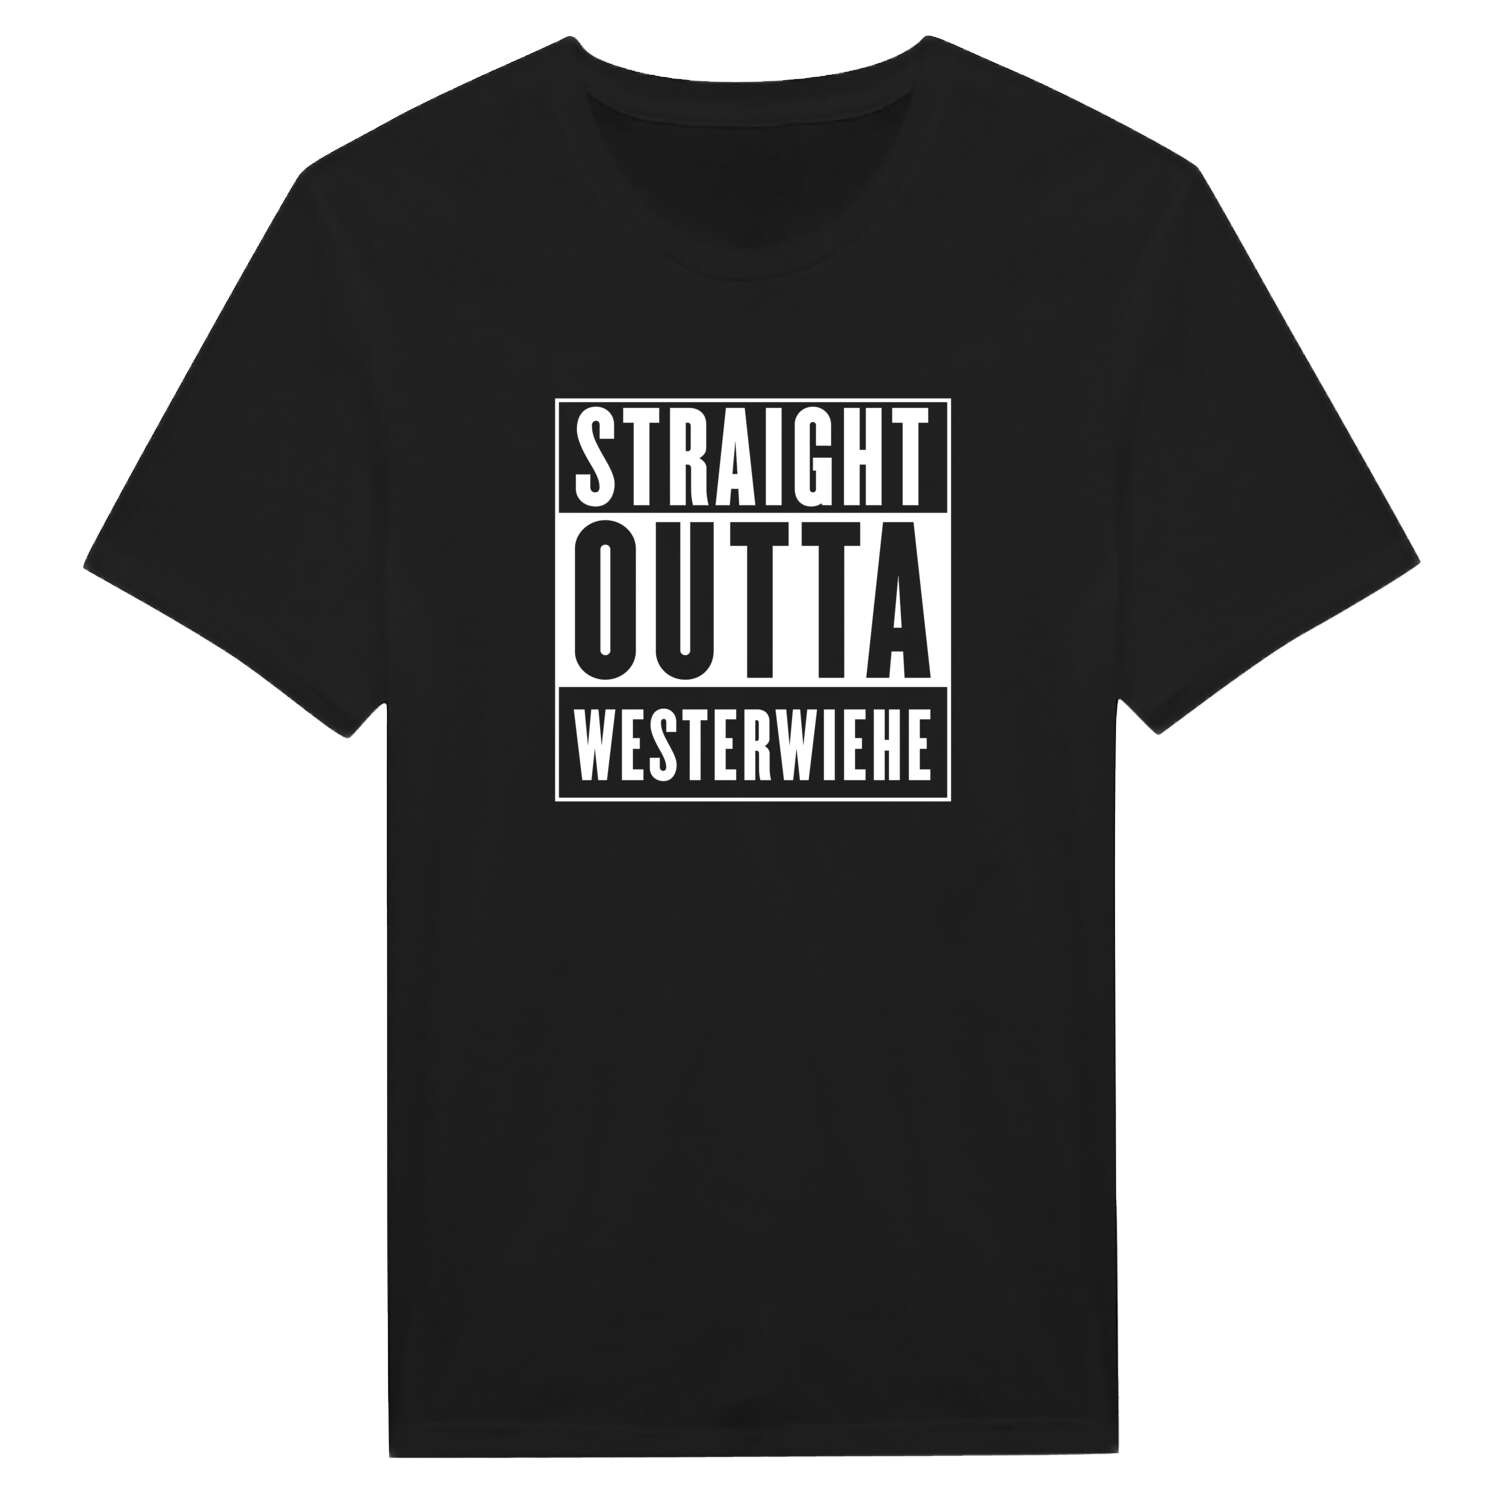 Westerwiehe T-Shirt »Straight Outta«